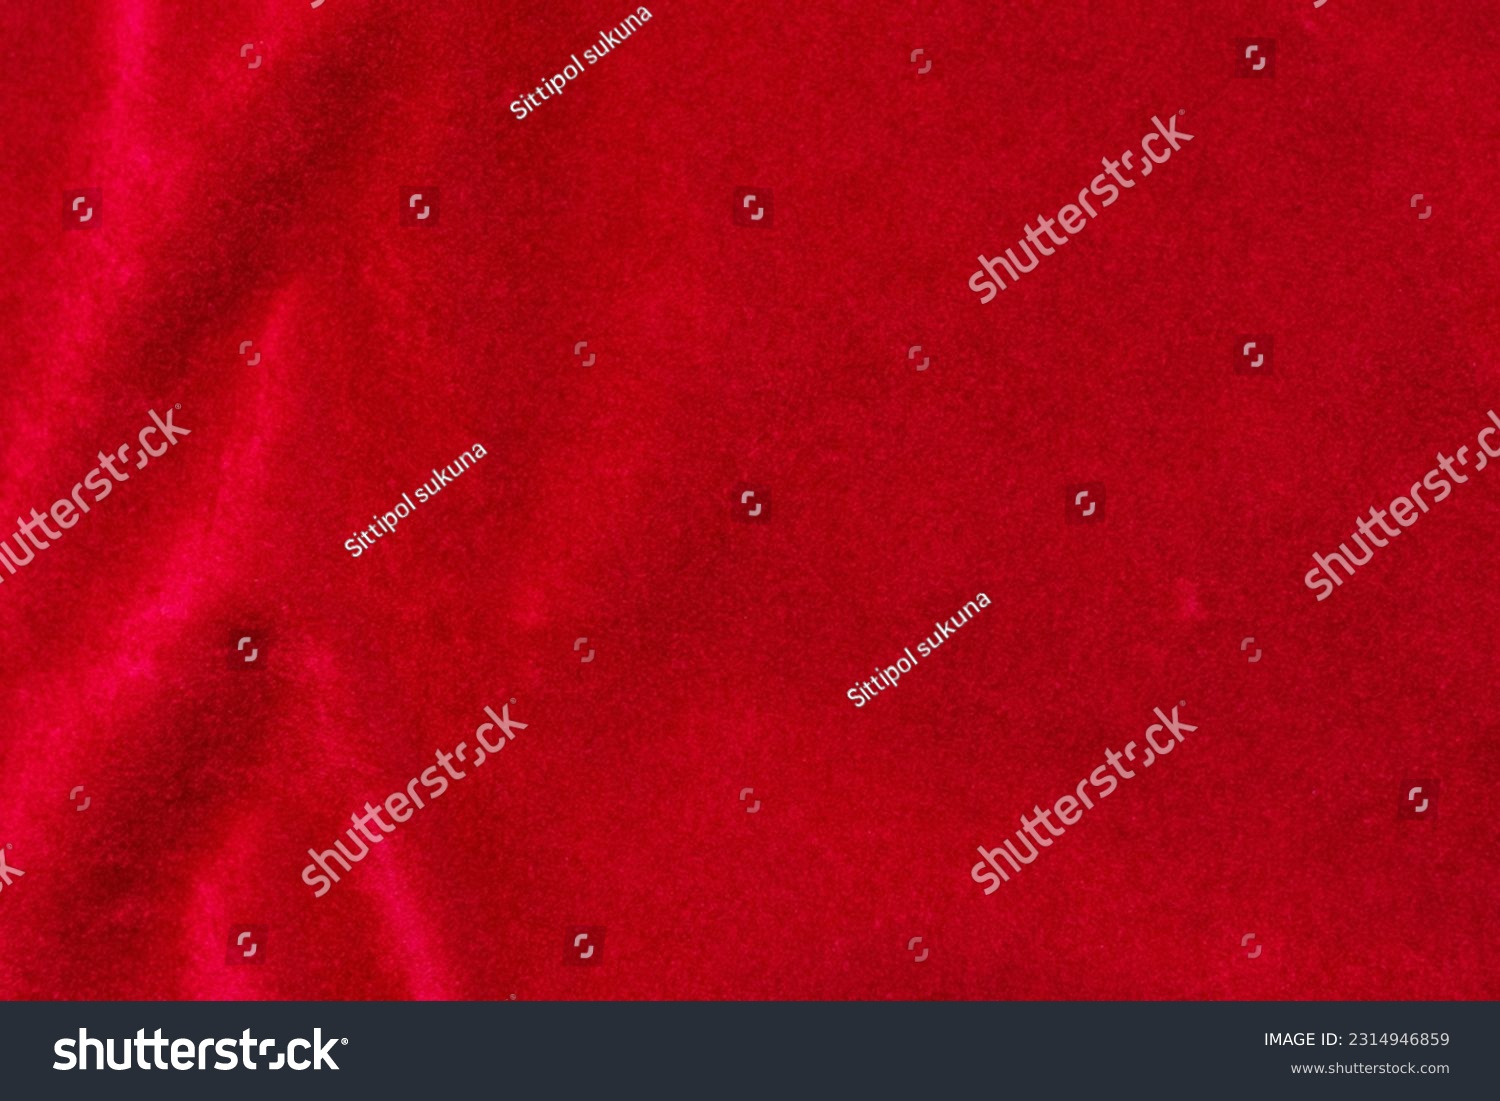 Red velvet fabric texture used as background. red fabric background of soft and smooth textile material. There is space for text.	 #2314946859